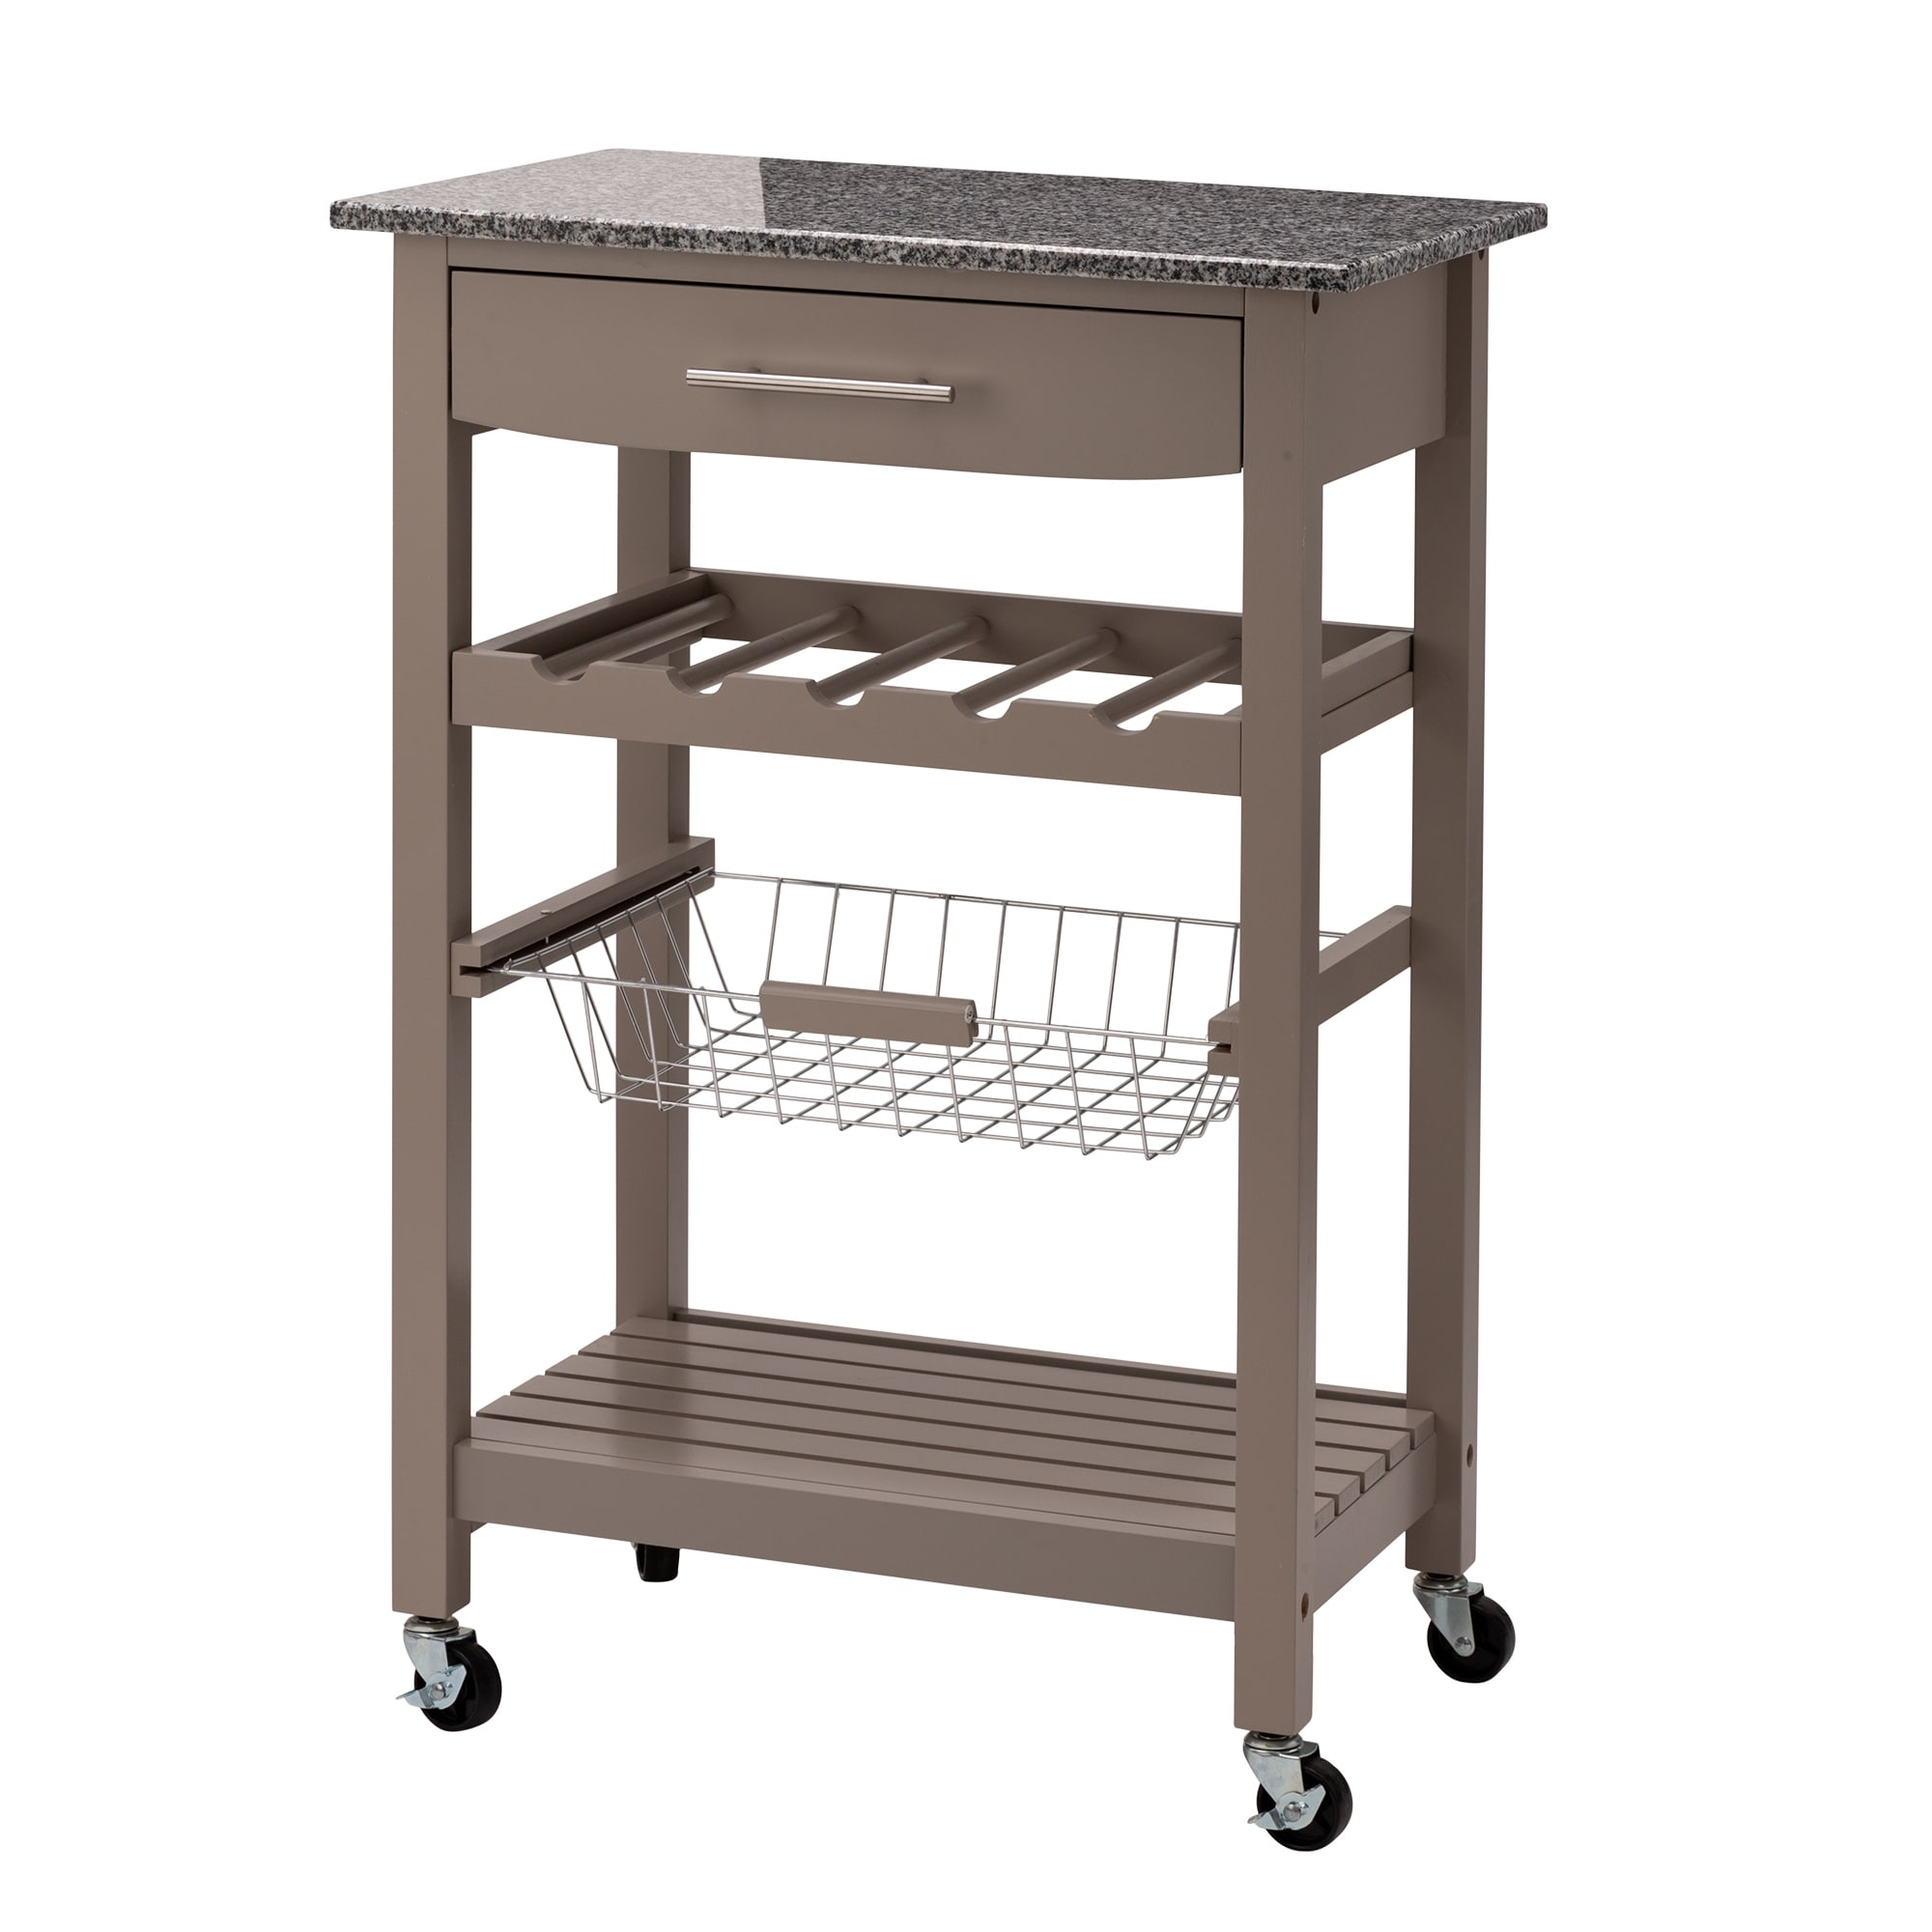 Glitzhome 34H Rolling Kitchen Island With Marble Top On Sale Overstock 30386955